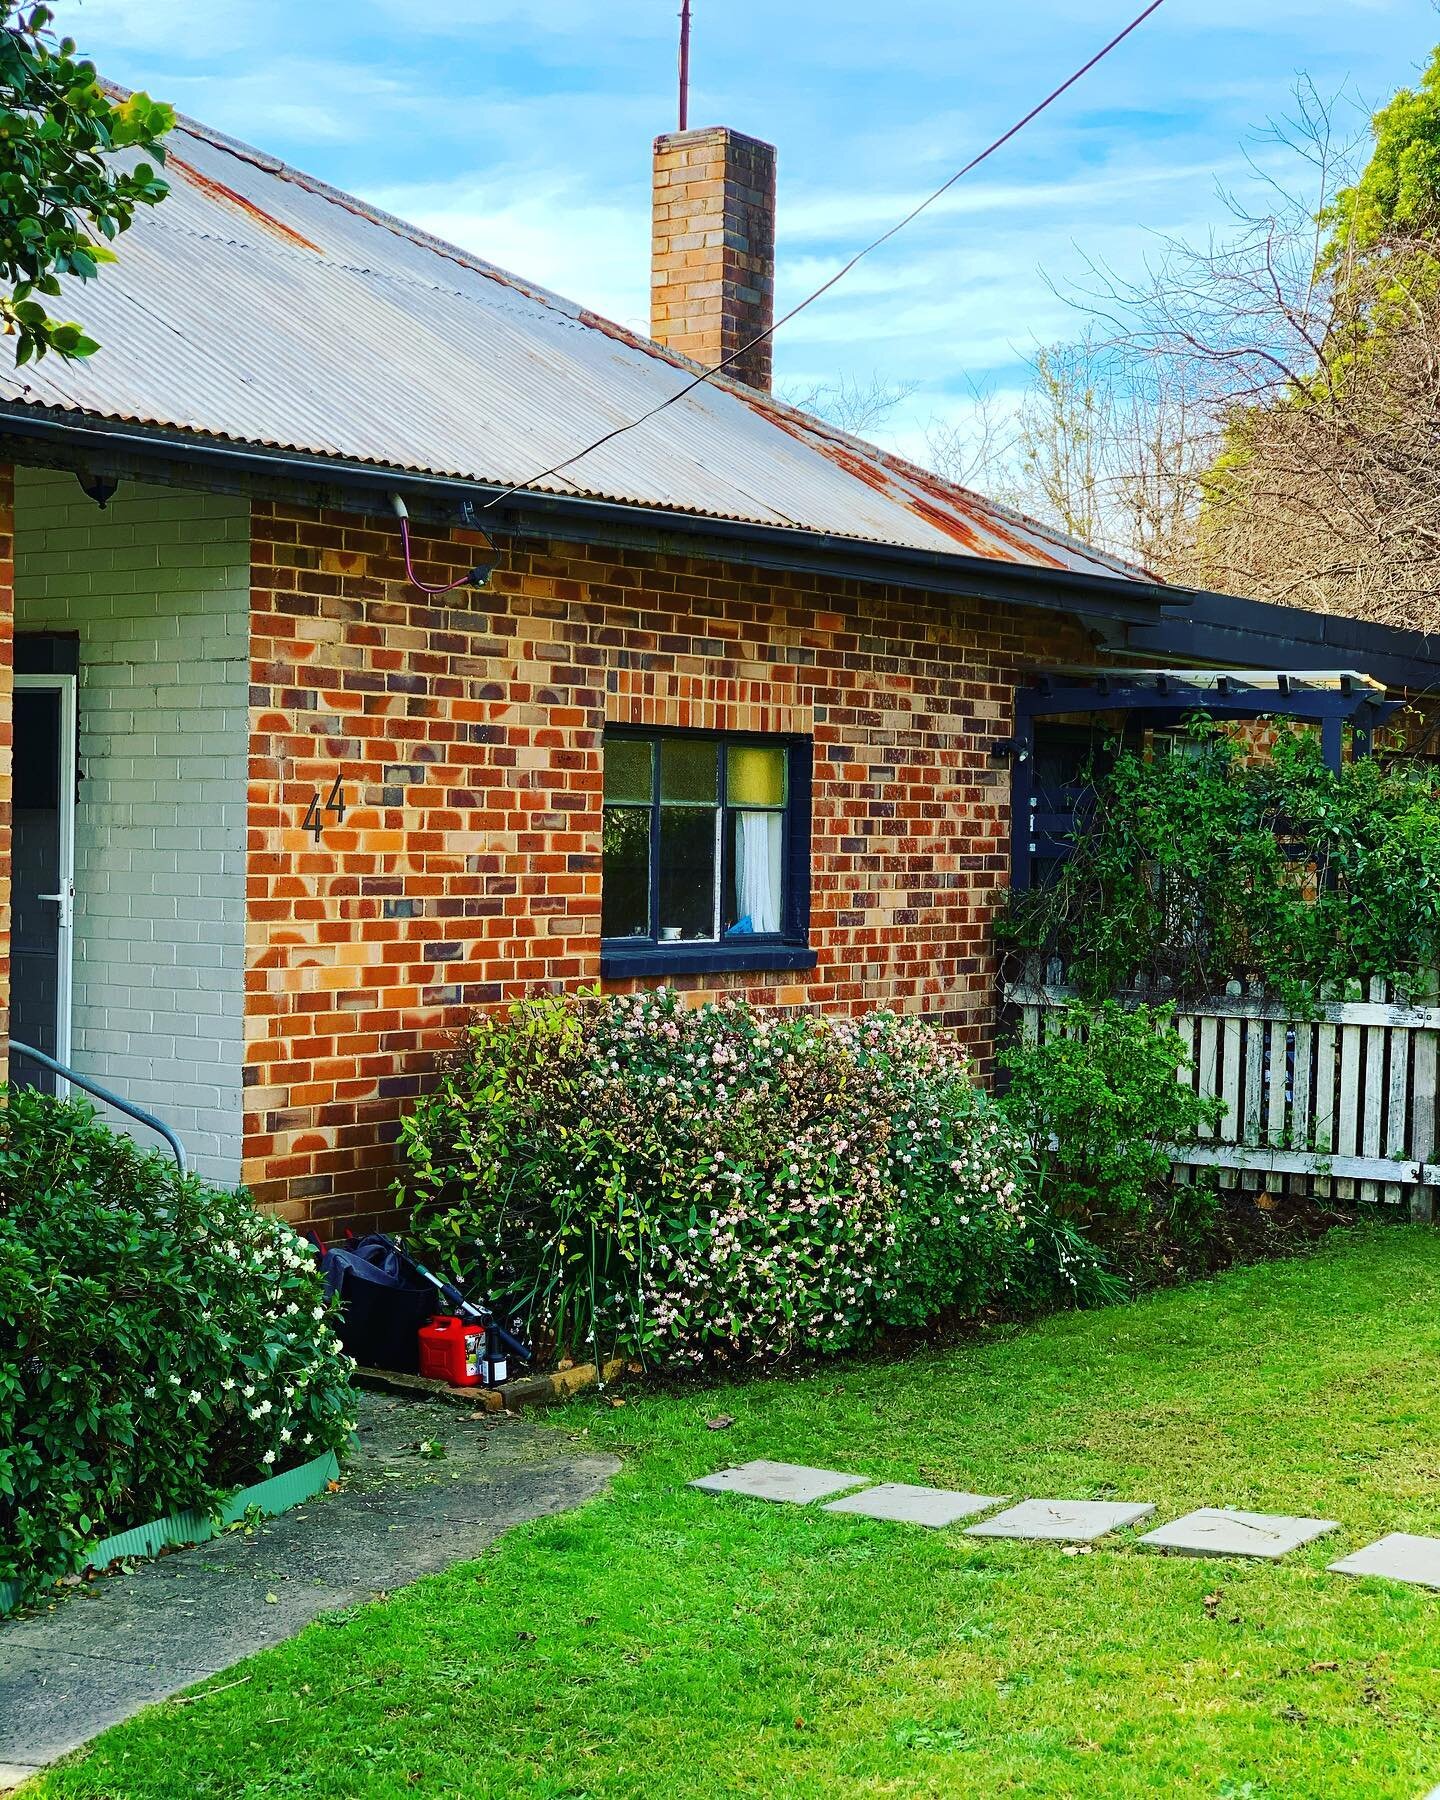 New digs taking shape 
.
.
.
#bundanoon #southernhighlands #cottage #gardening #country #home #southernhighlandsnsw #renovationproject